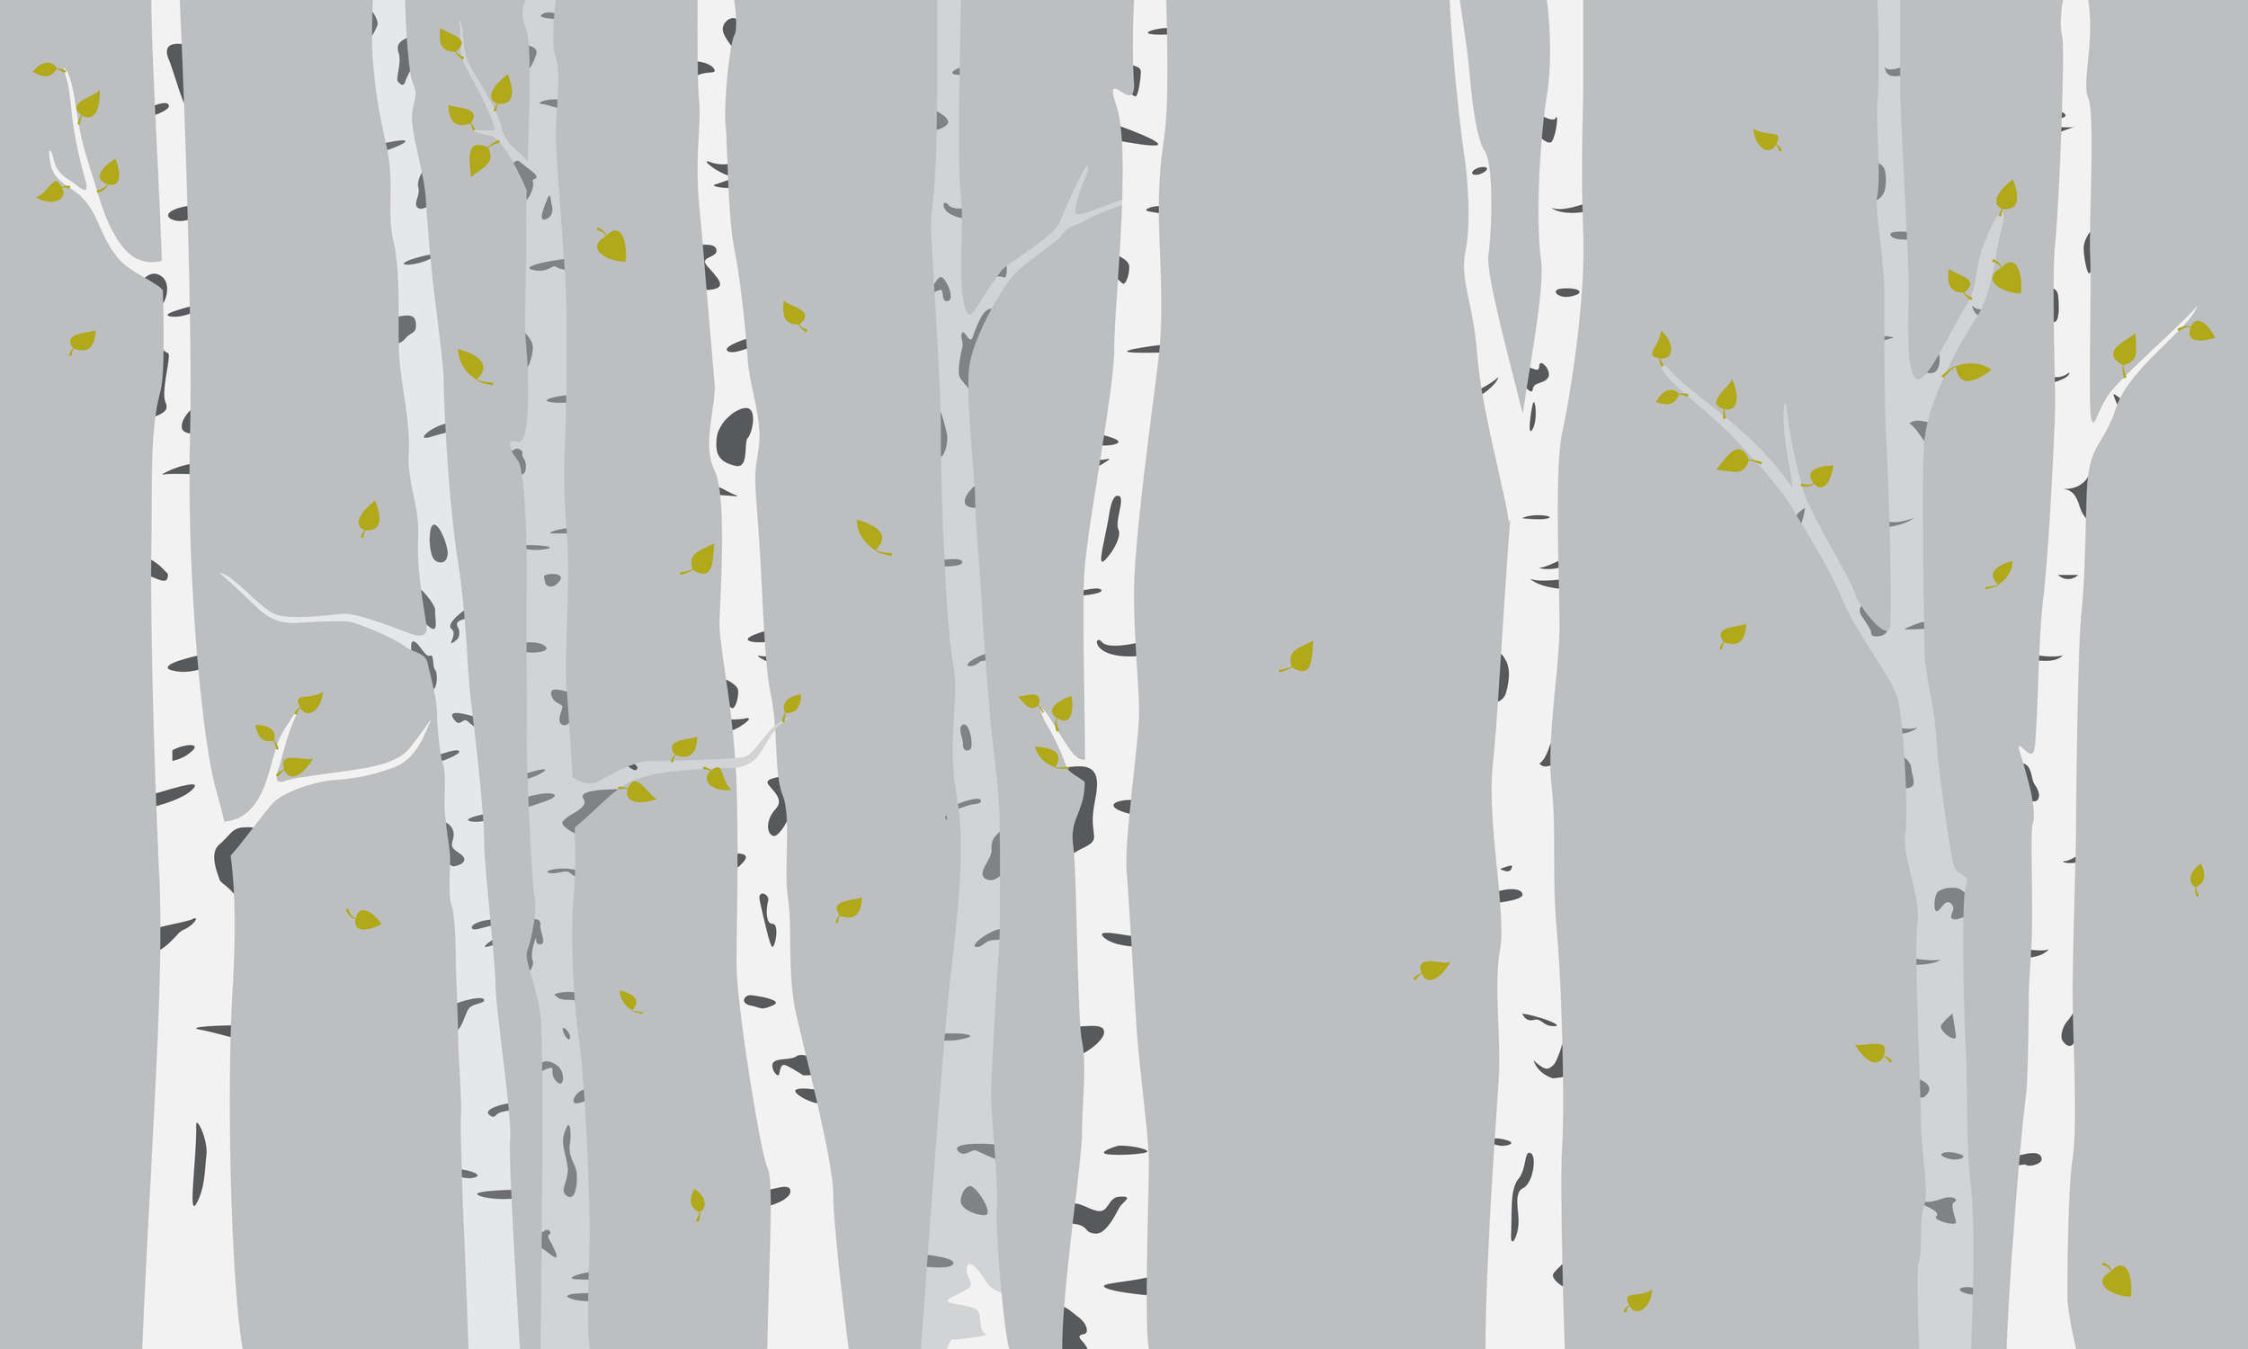             Photo wallpaper with painted birch forest for children's room - Smooth & matt non-woven
        